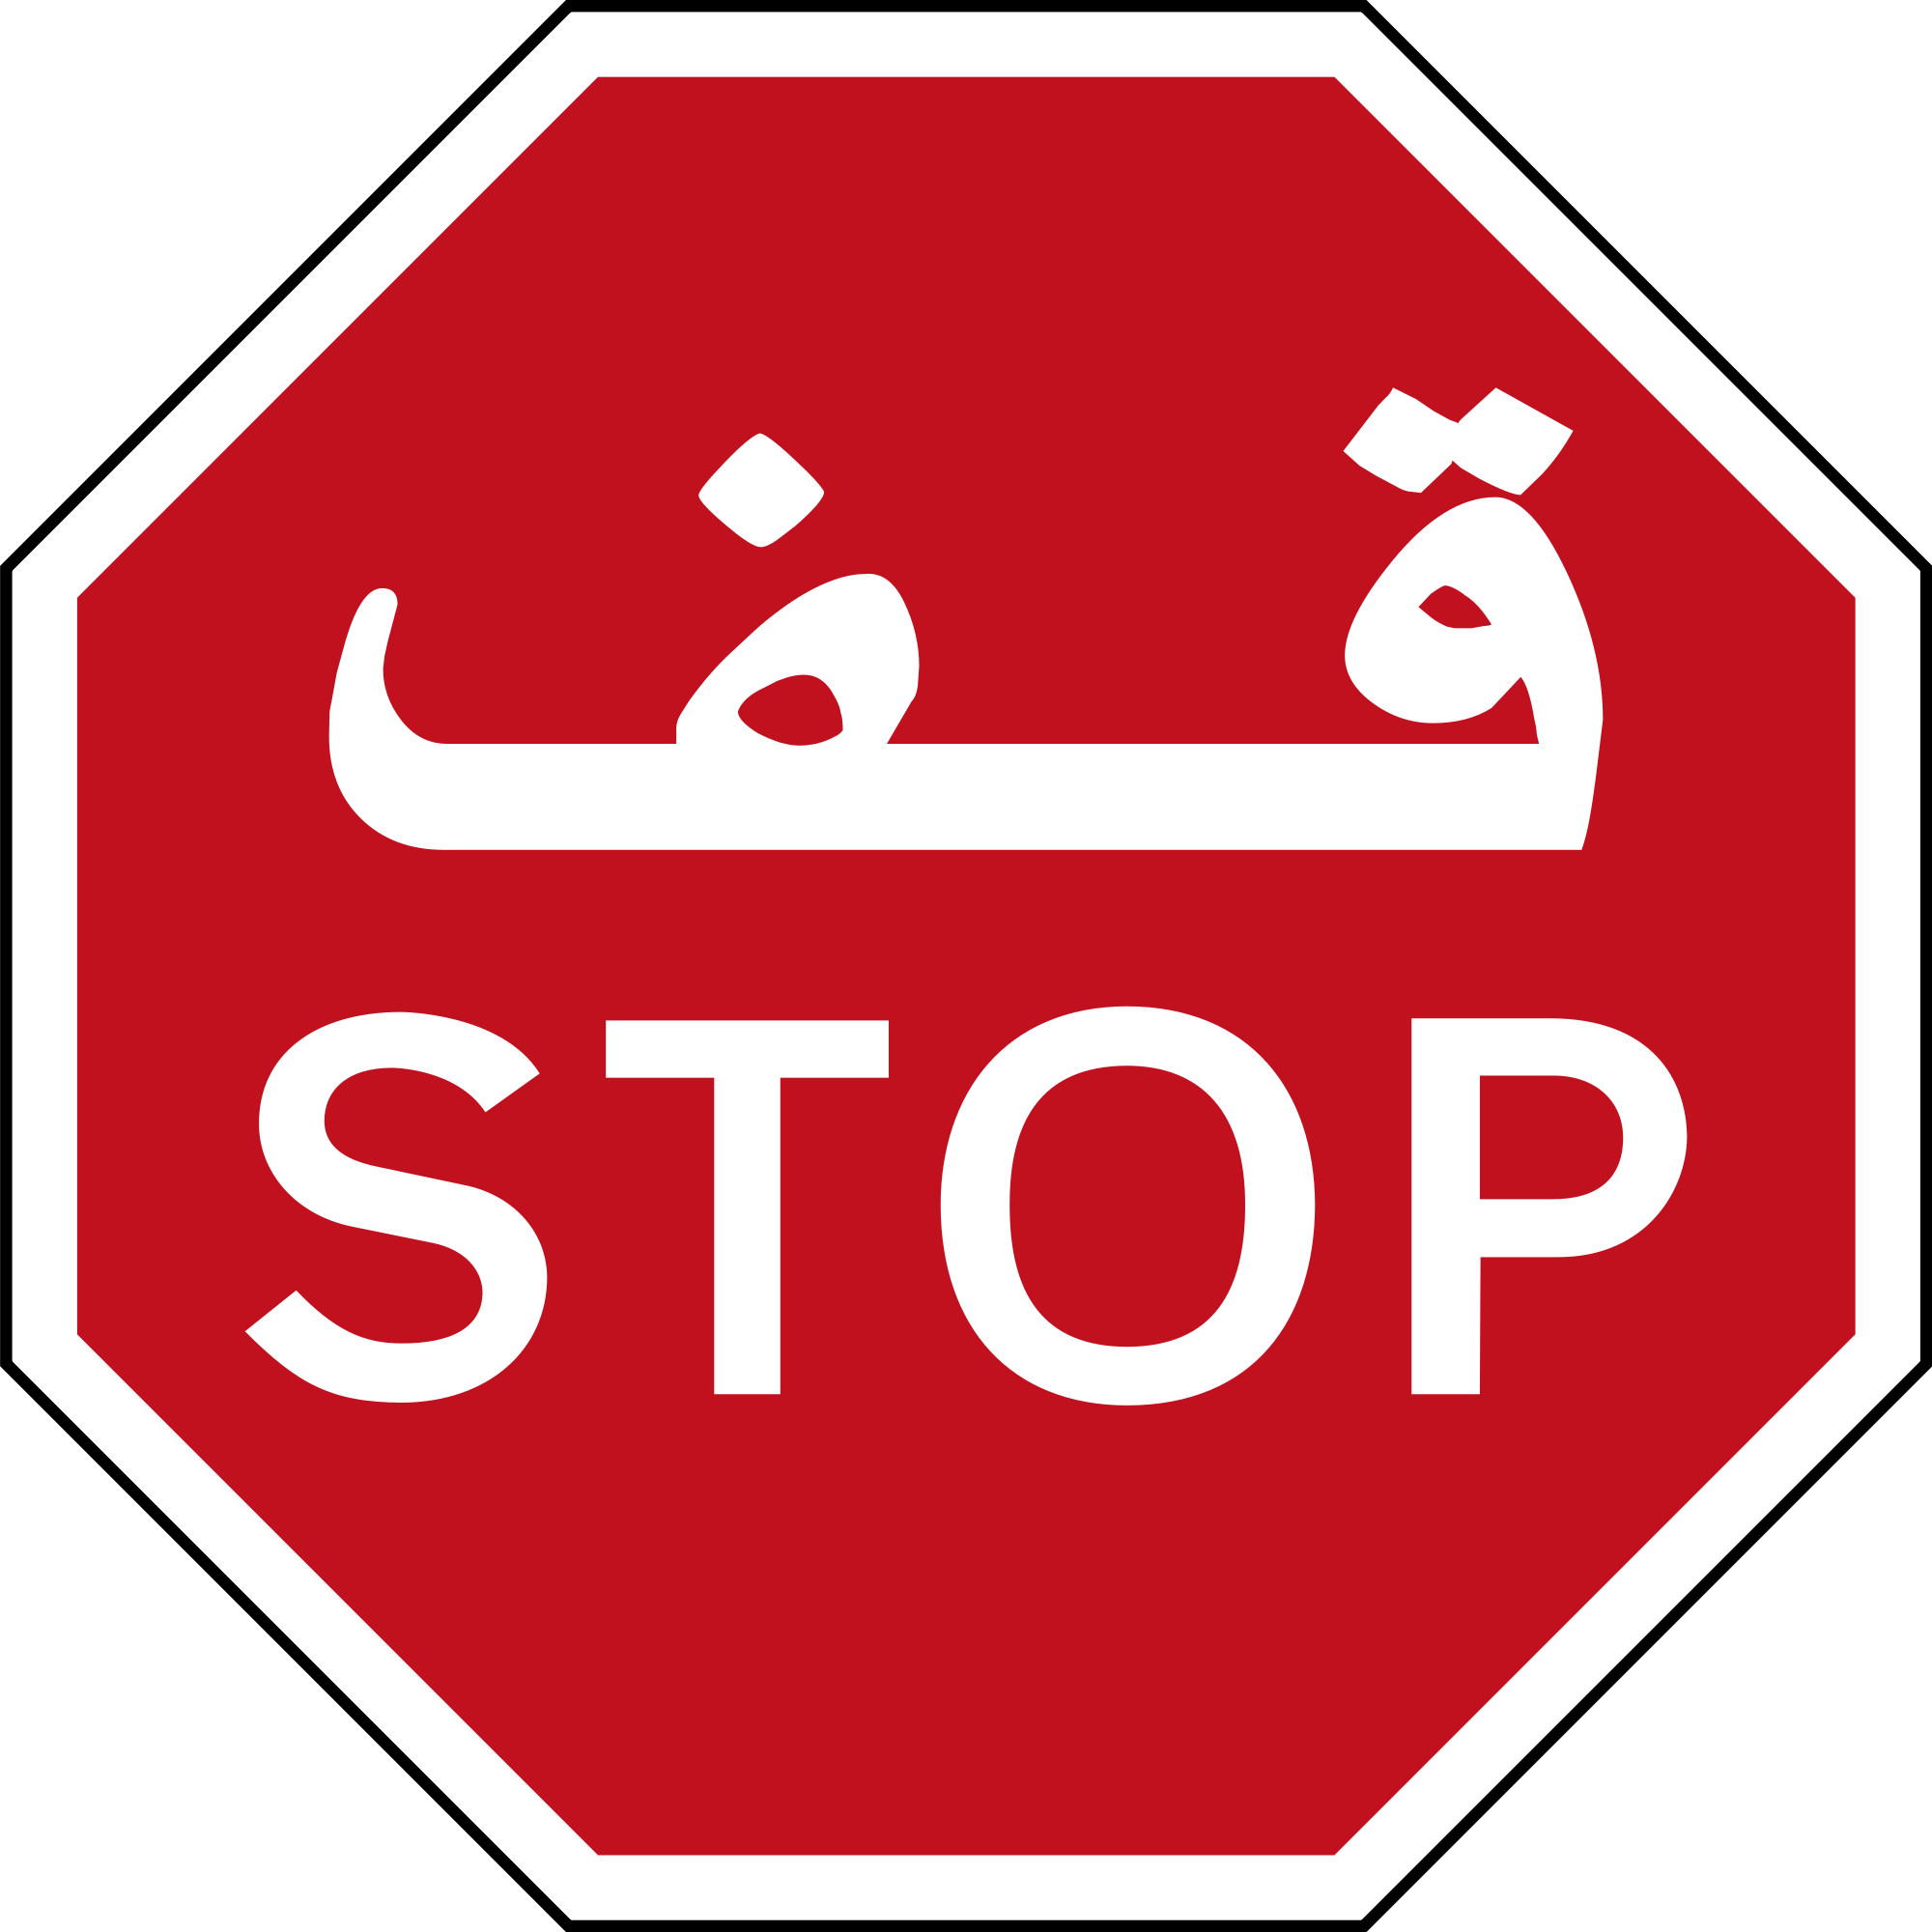 File:Stop sign (United Arab Emirates).svg - Wikimedia Commons